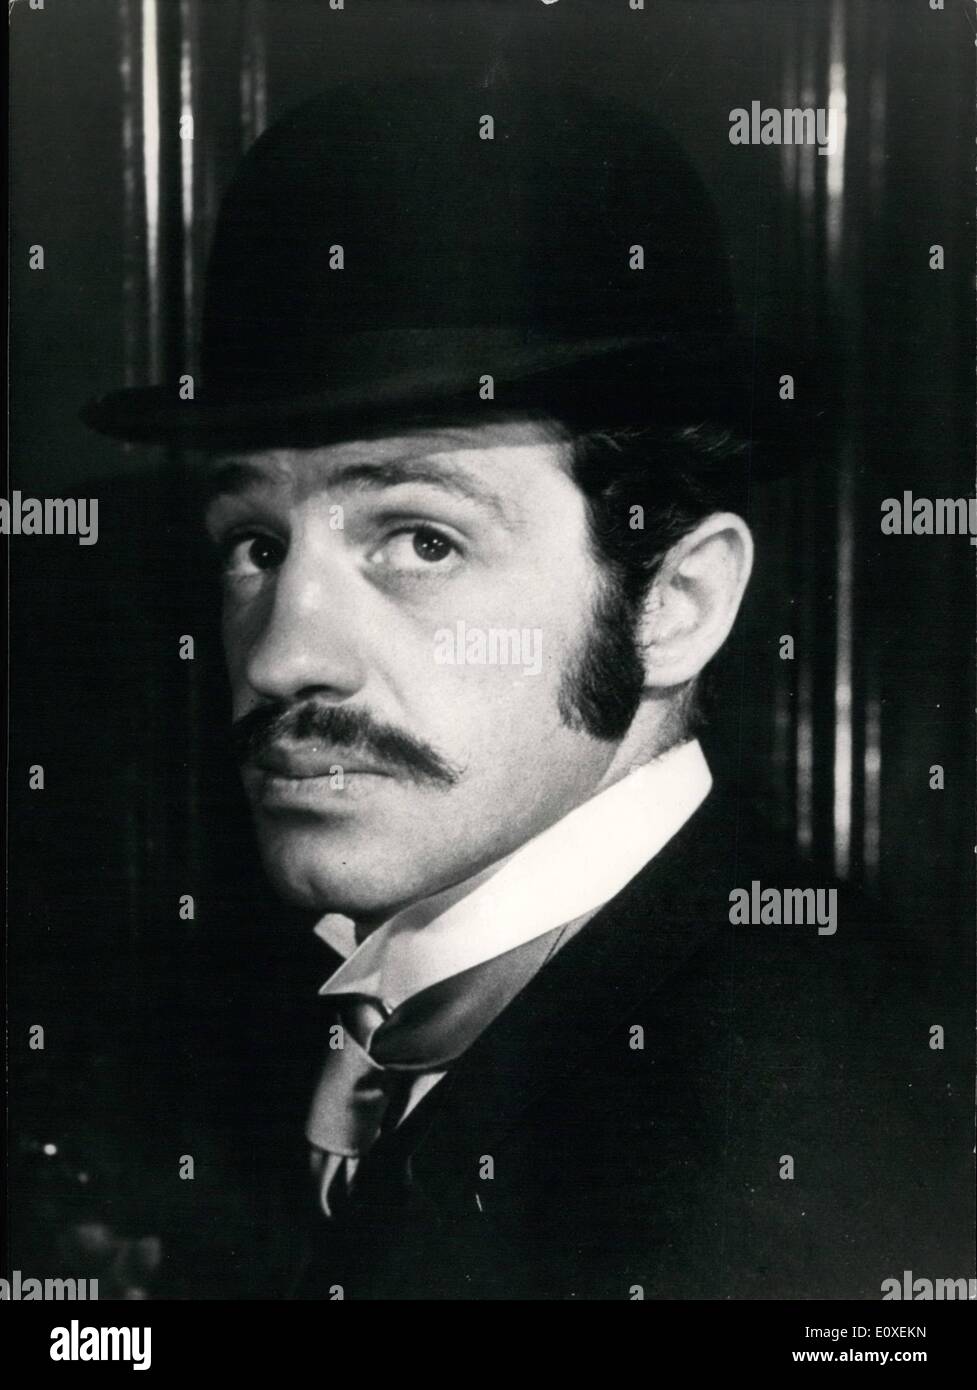 Aug. 08, 1966 - Belmondo as Belie Epoque Beau: Jean Paul Belmondo, the famous french screen actor, impersonates a beau of the 'Belie Epoque' in Louis Malie's New film ''Le Voleur'' (The Thief) now in the making in Paris. Photo shows Belmondo in his new role. Stock Photo